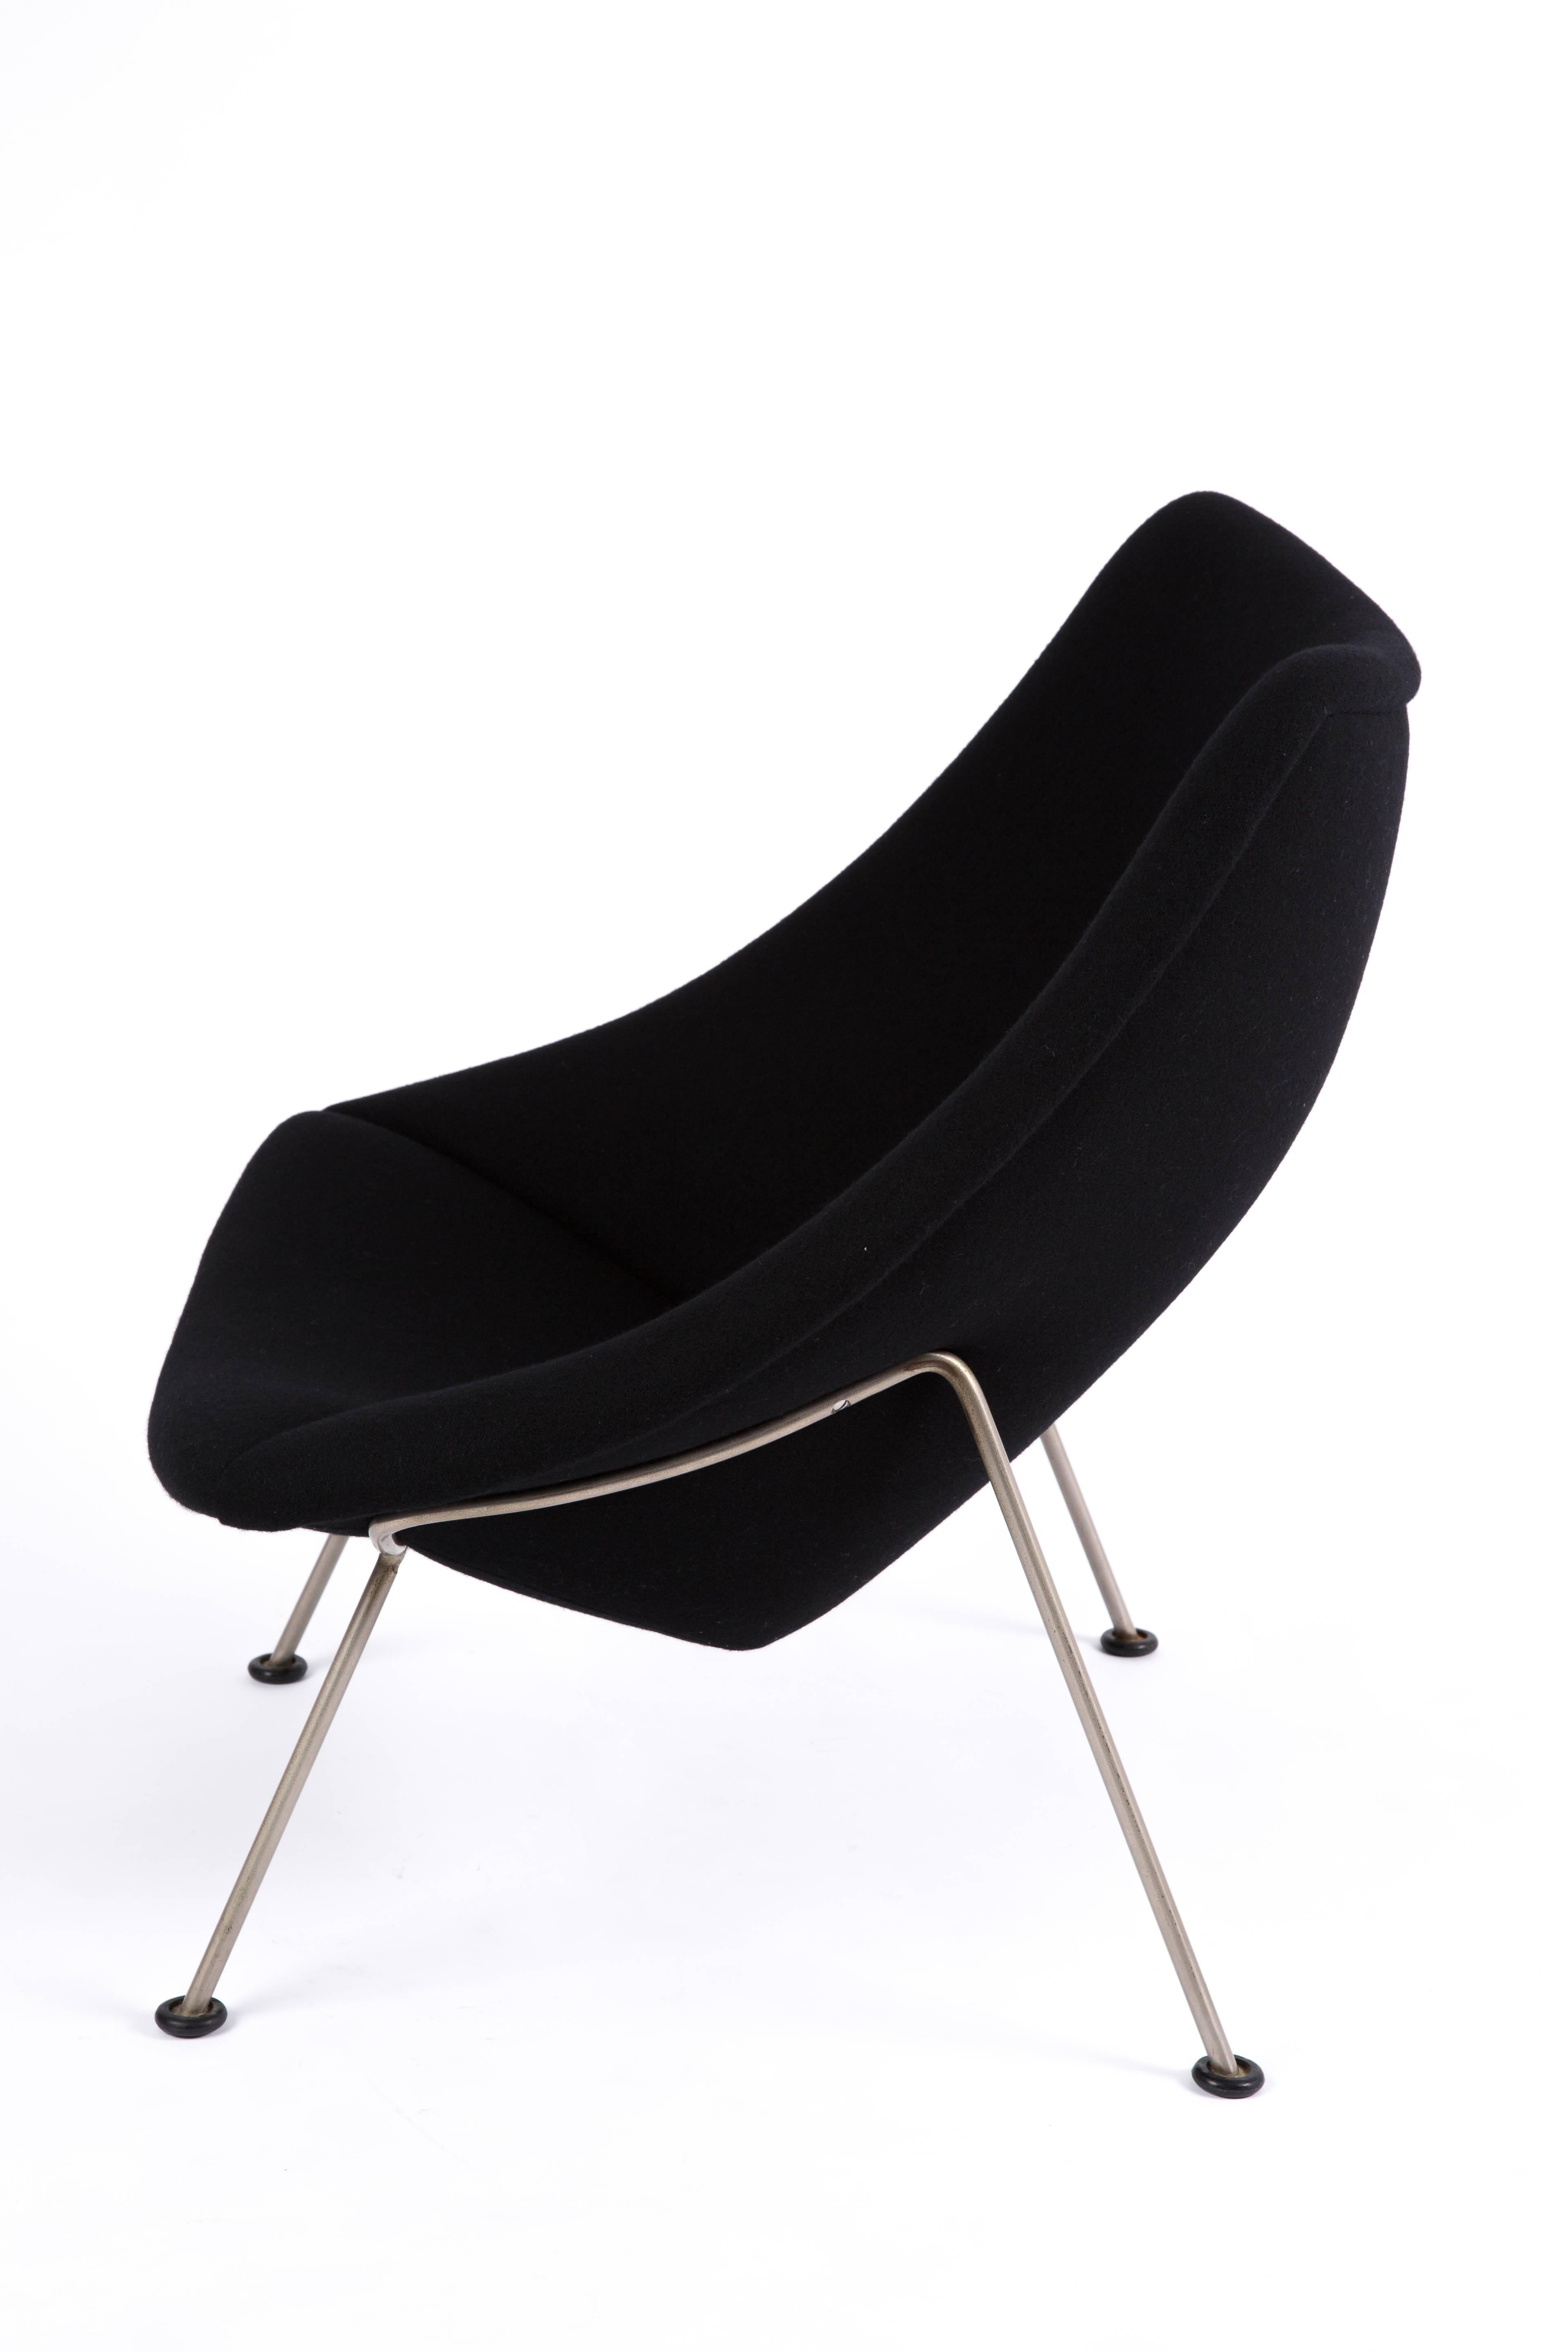 A simple frame and big sitting like a womb. Designed by Pierre Paulin in 1960. Reupholstered with black wool Kvadrat Tonus fabric.